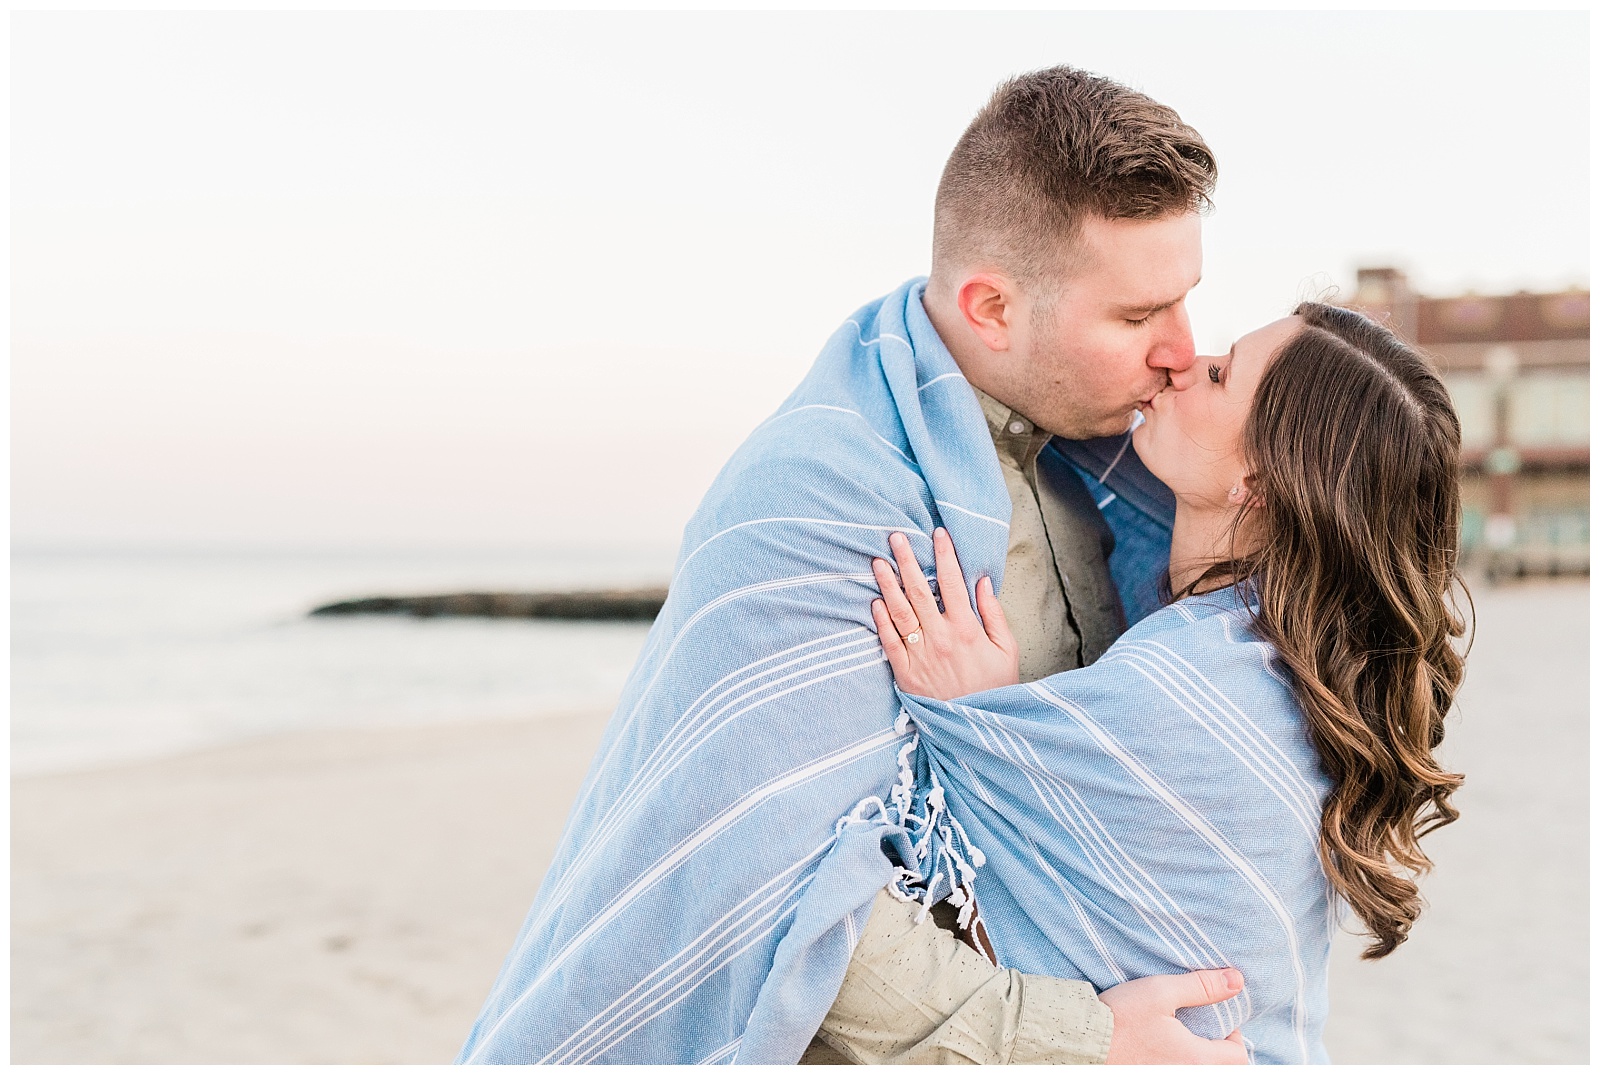 New Jersey, Engagement Session, Asbury Park, NJ, Wedding Photographer, Springtime, Light and Airy, Golden Hour, Beach, Blanket